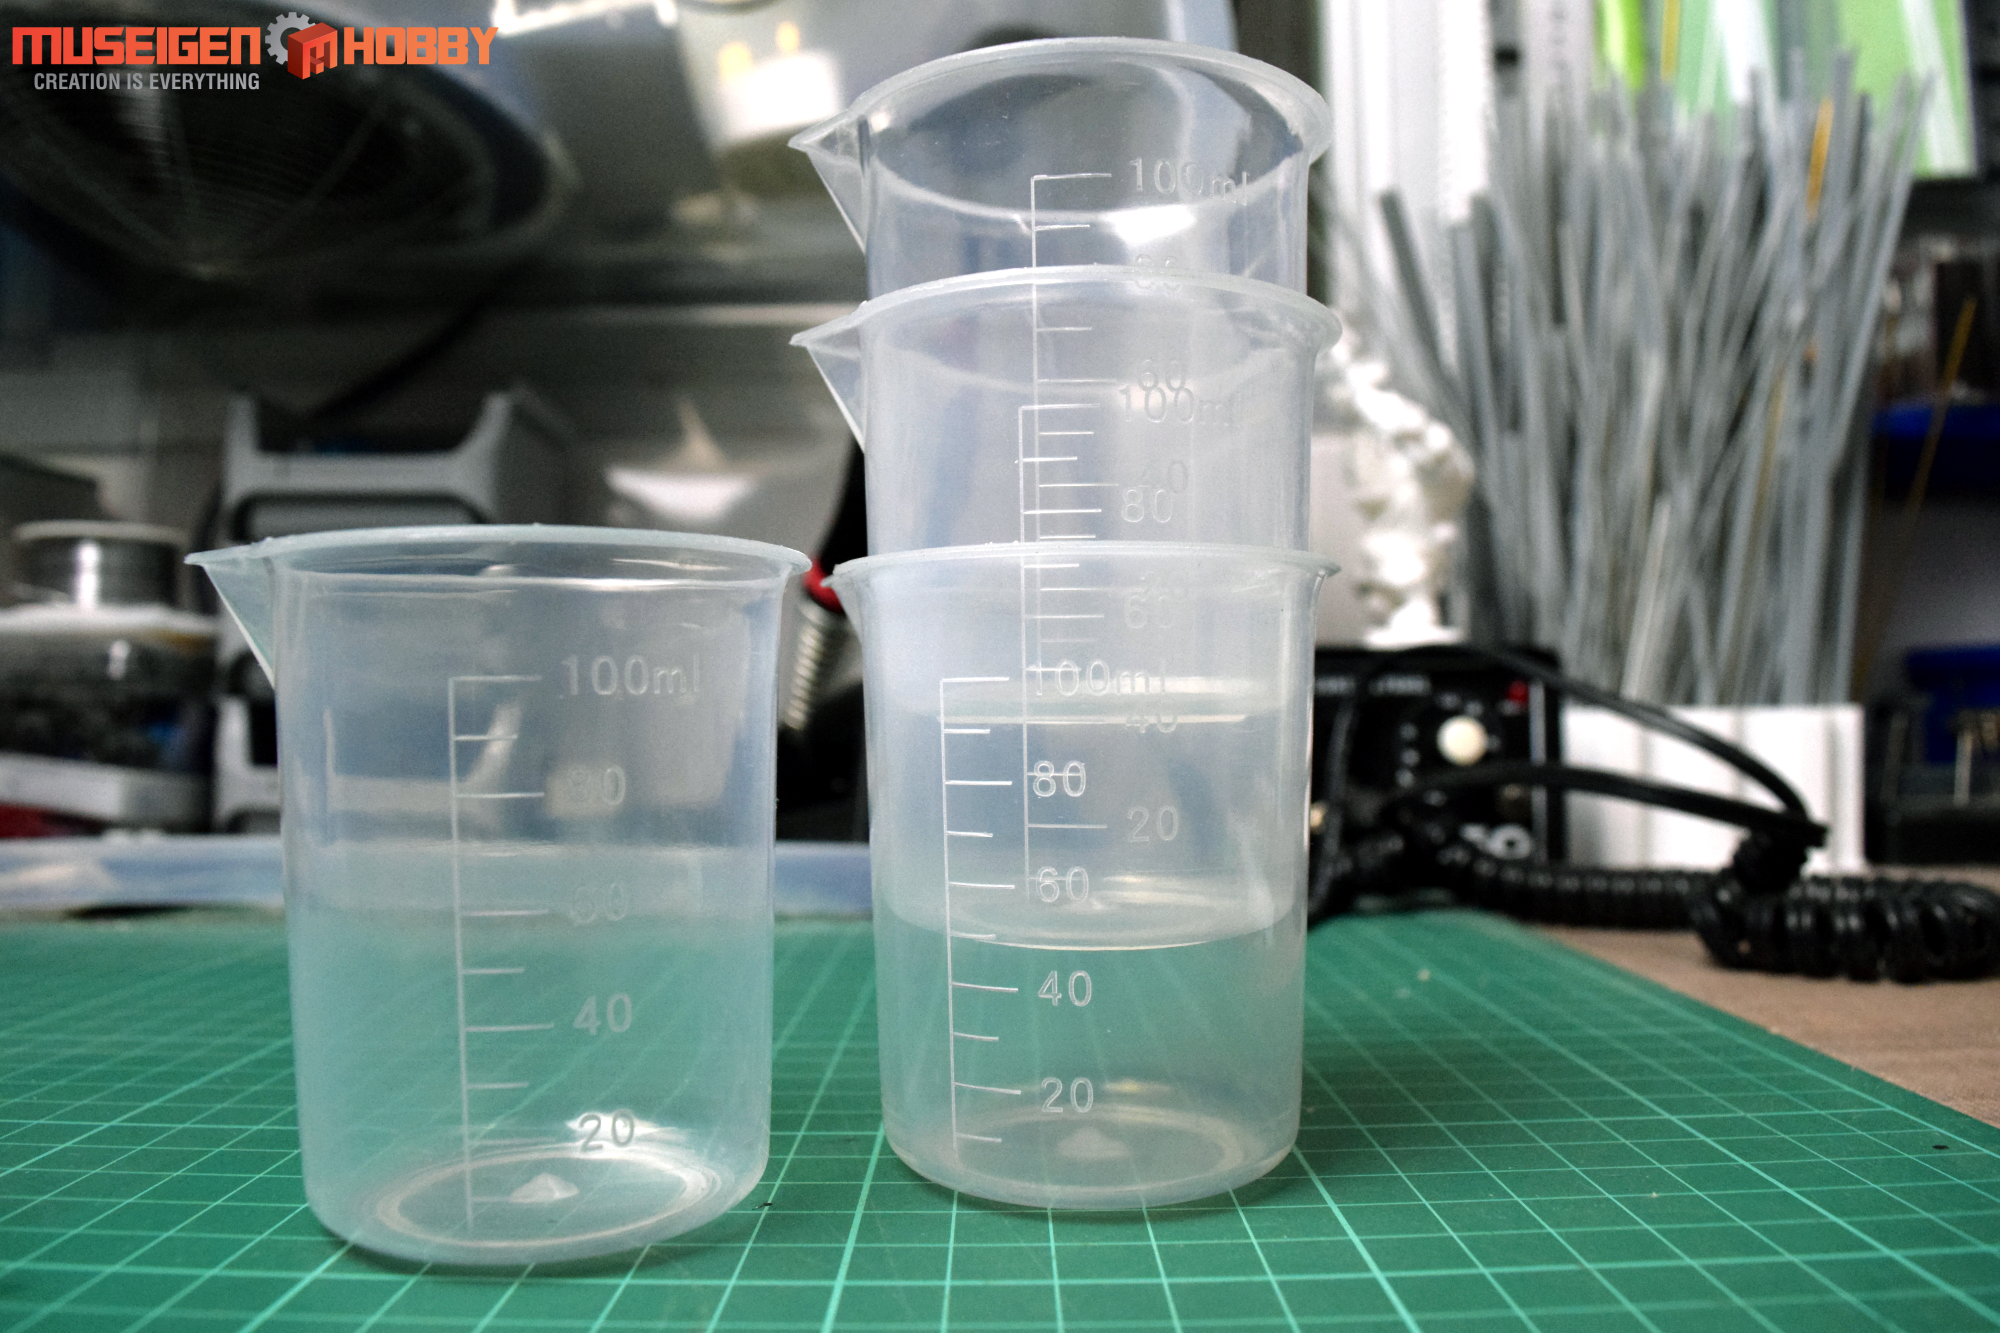 https://www.museigenhobby.com/wp-content/uploads/2018/01/Clear-Plastic-Measuring-Cup-100ml_01-1.png